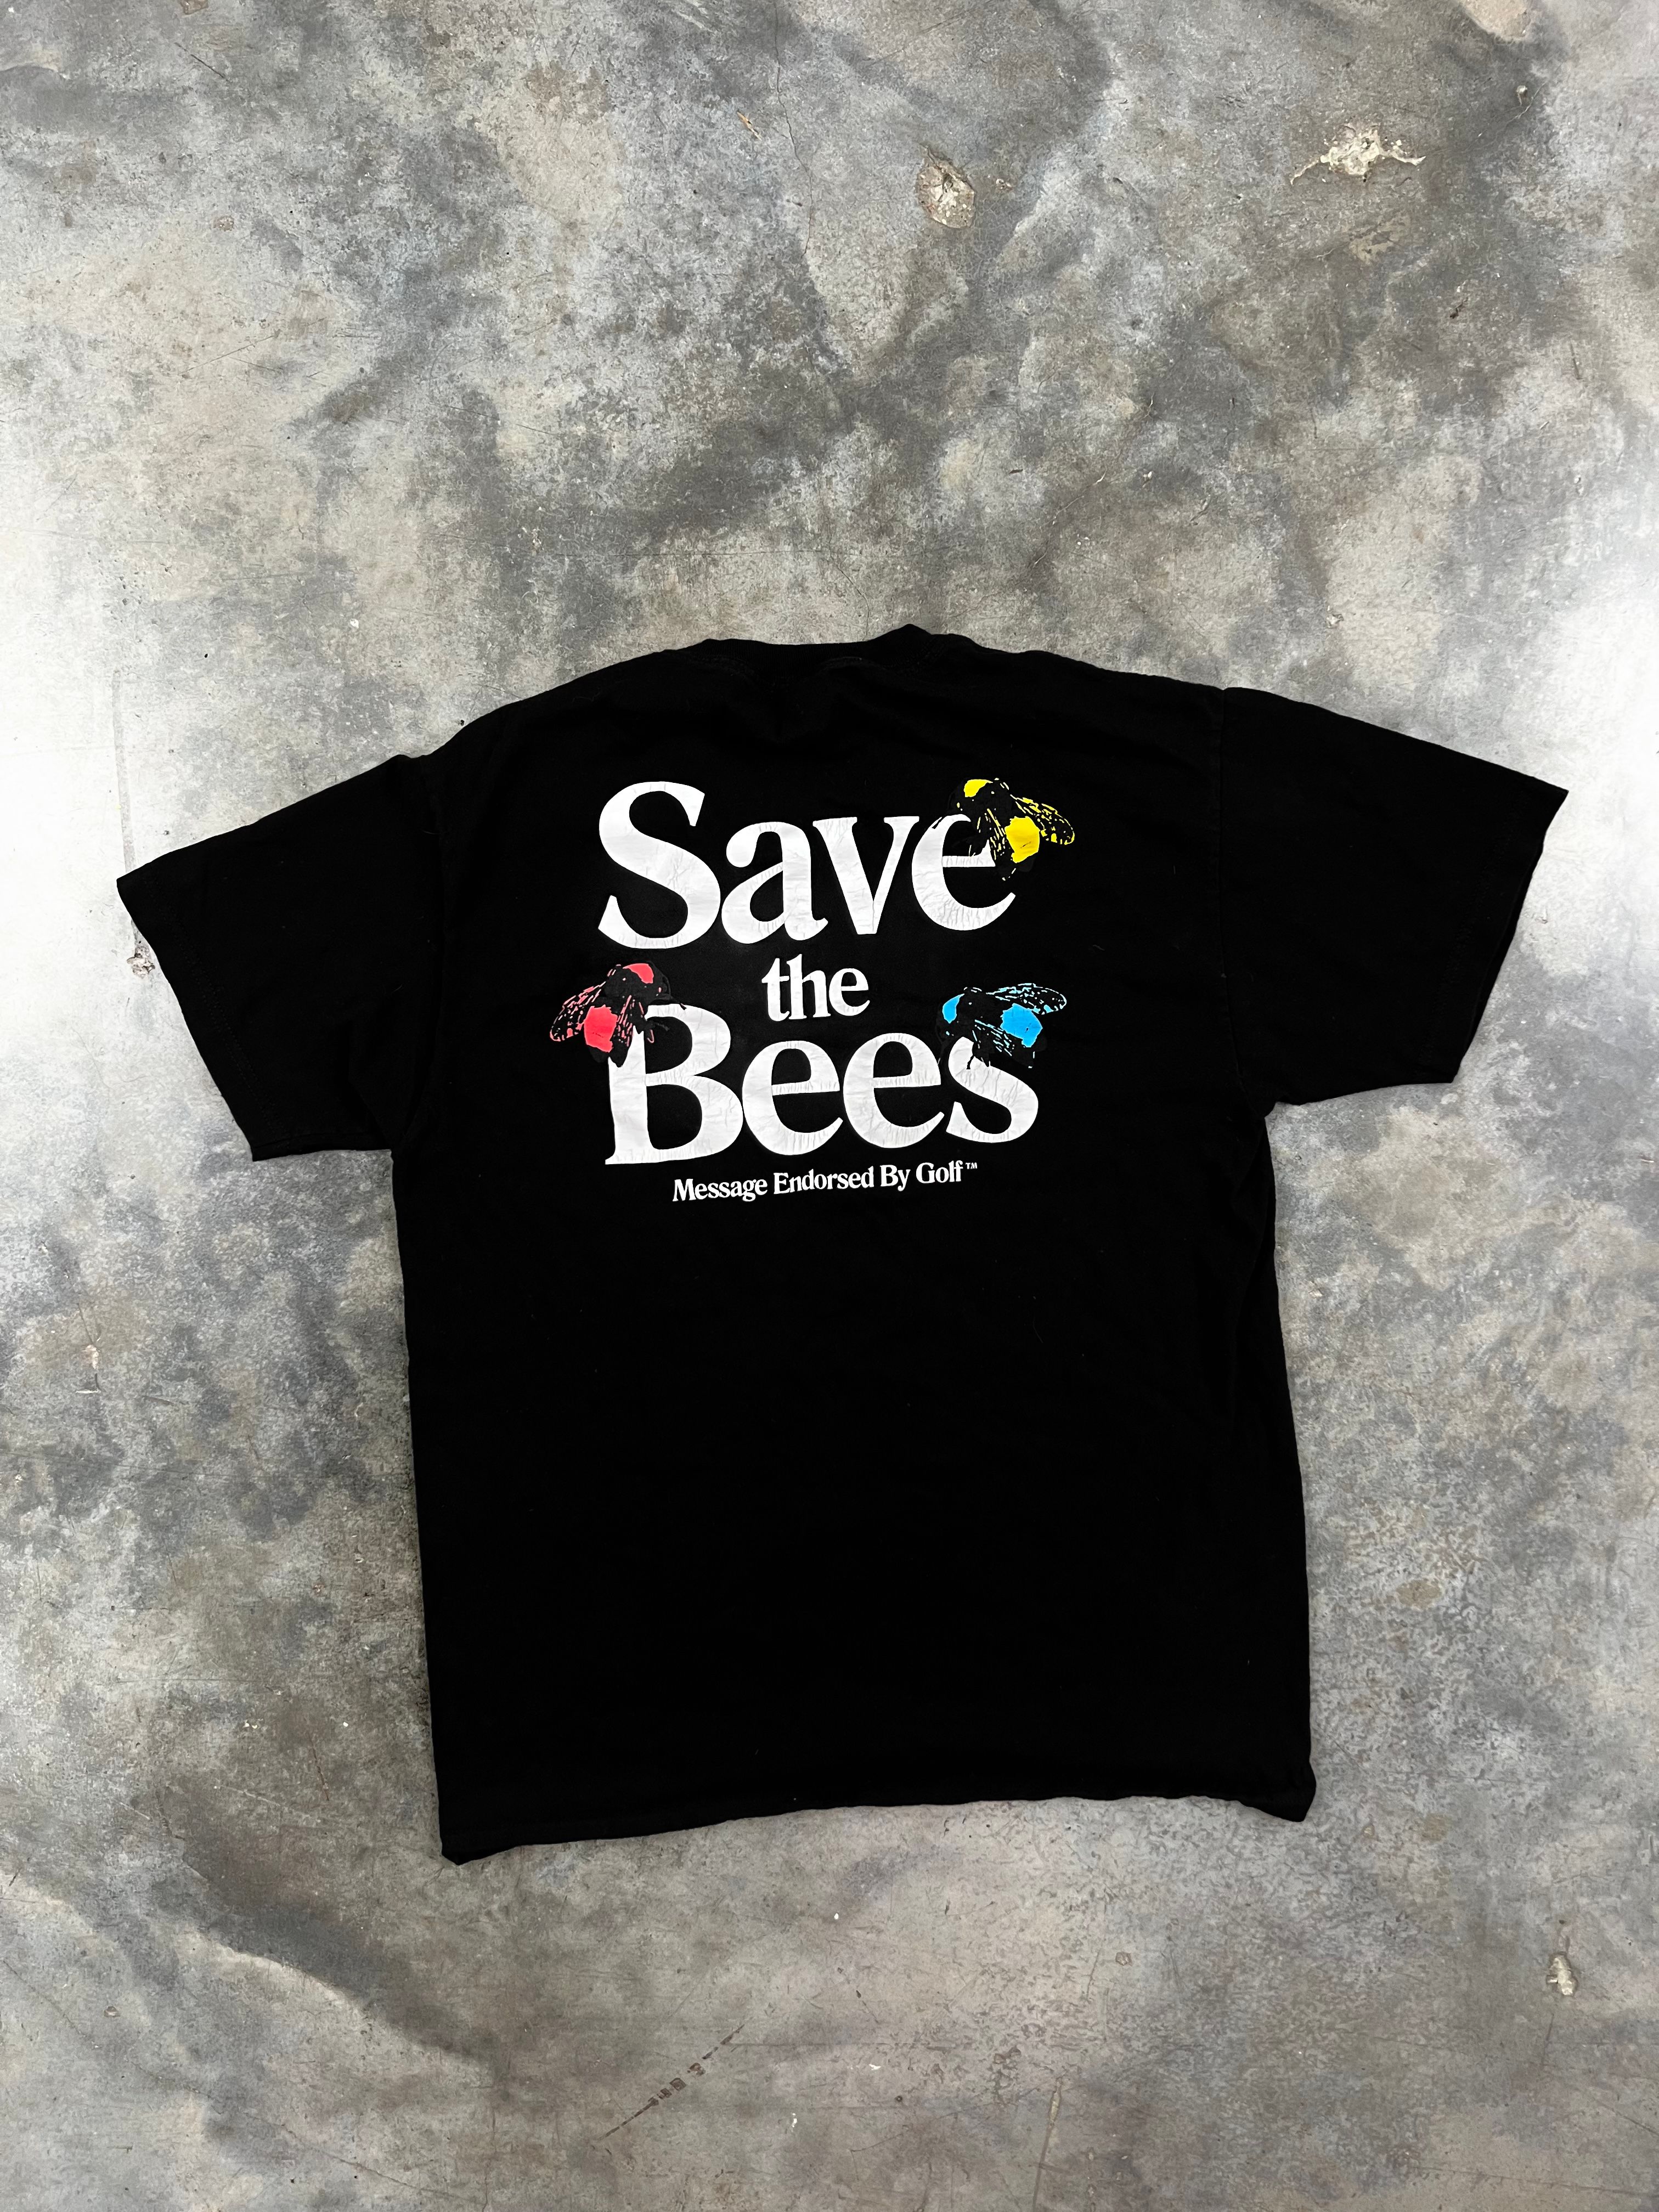 Pre-owned Golf Wang Save The Bees Logo Tee Black Large